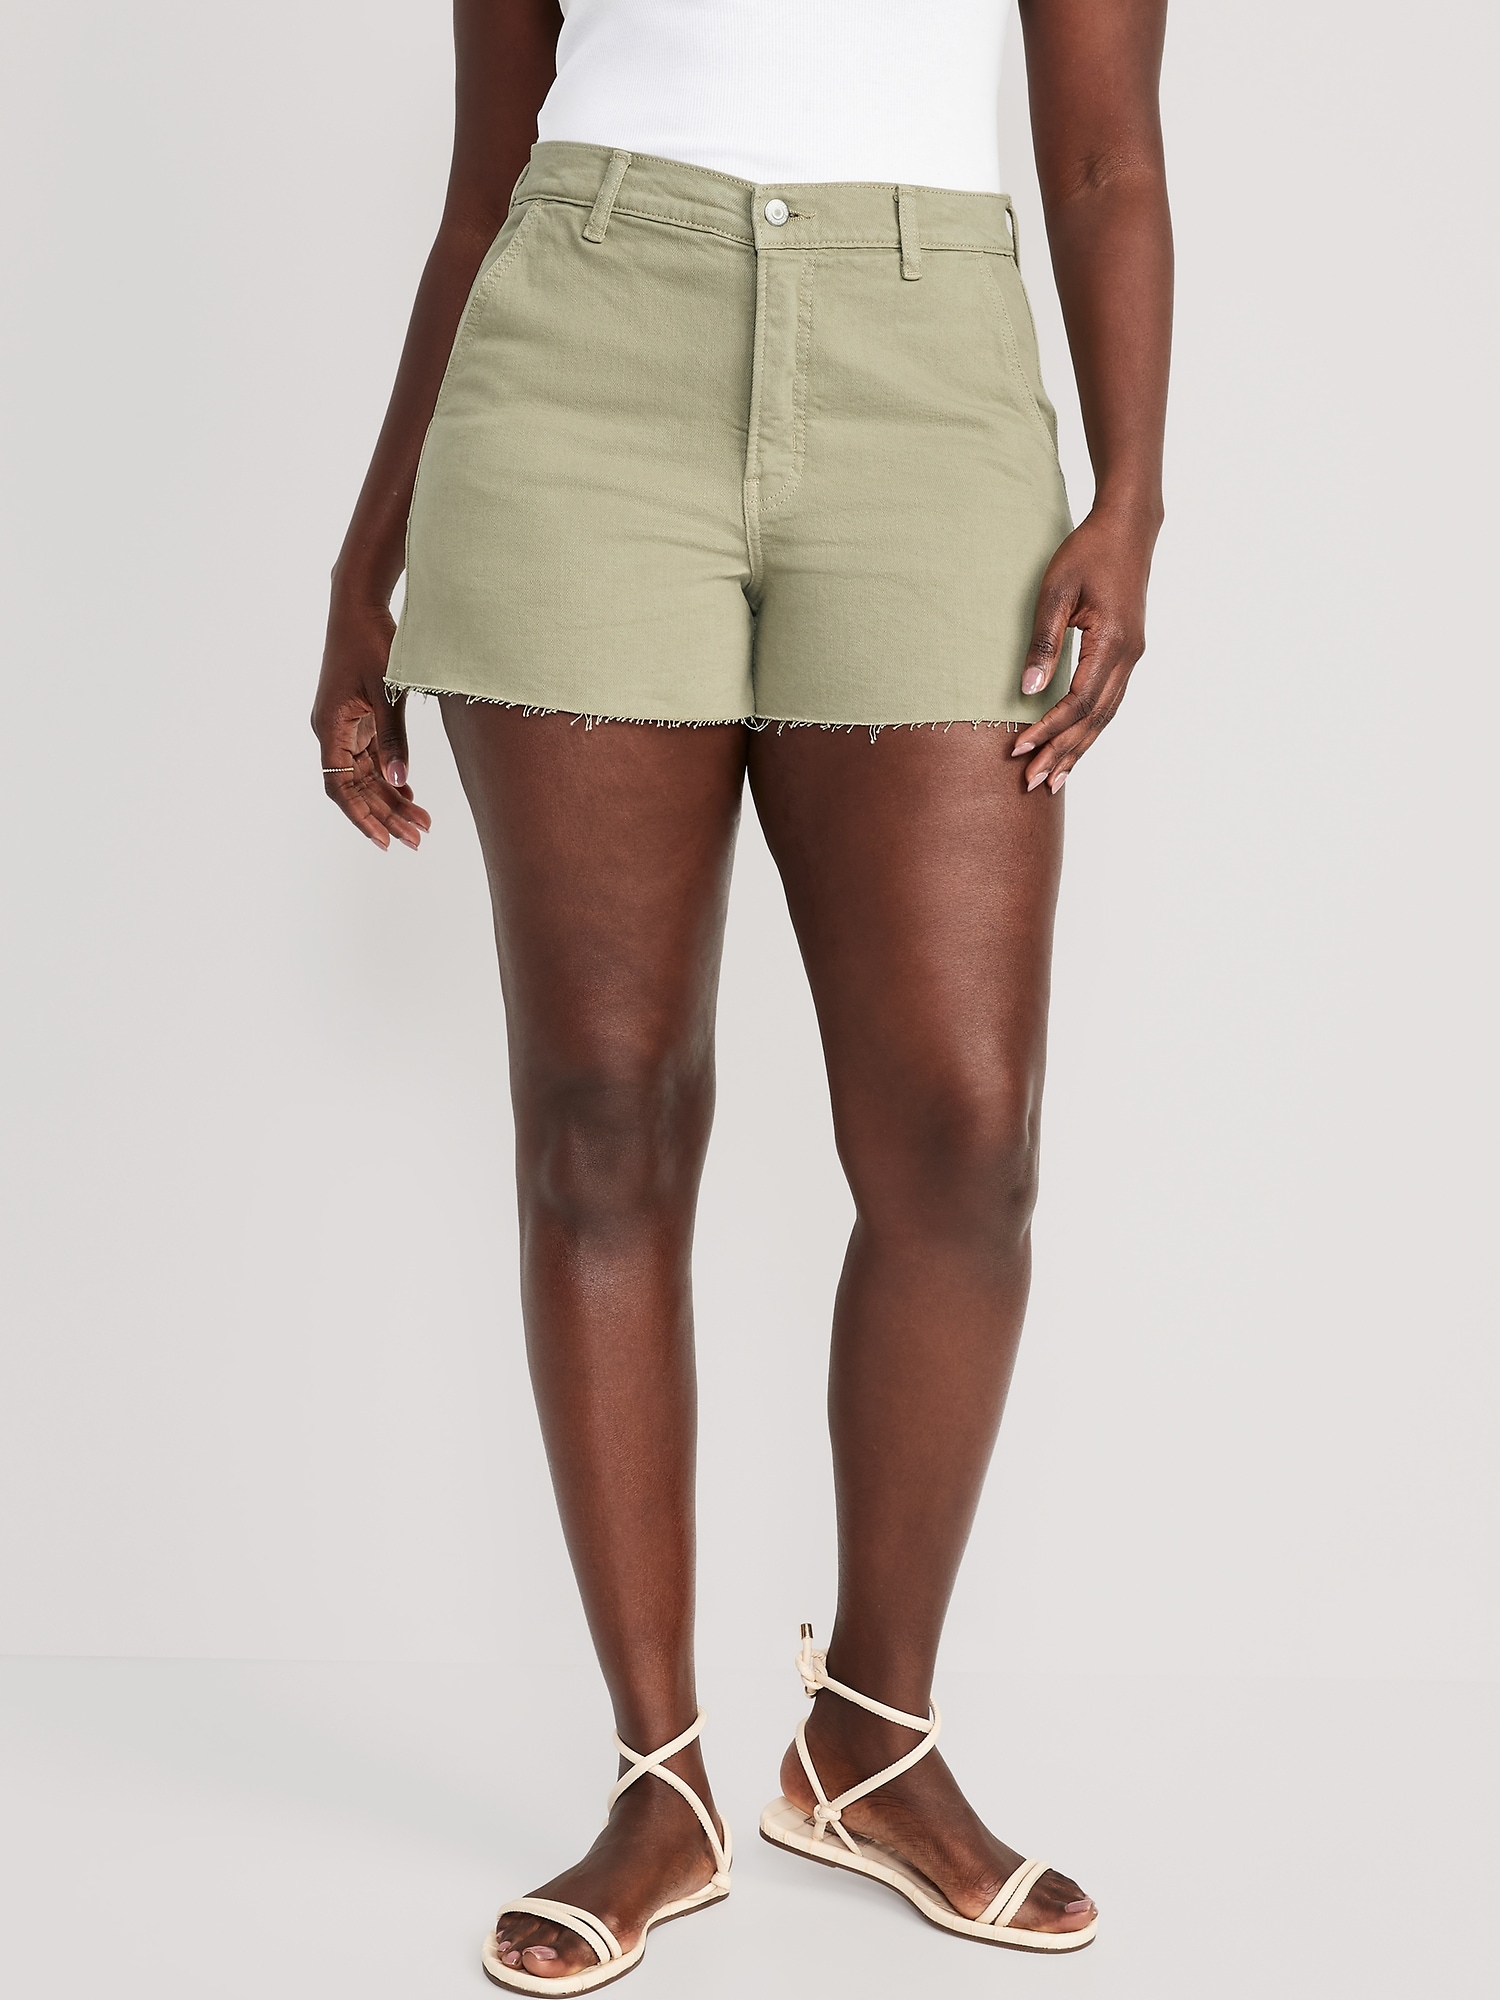 Higher High-Waisted Sky-Hi A-Line Cut-Off Workwear Jean Shorts for